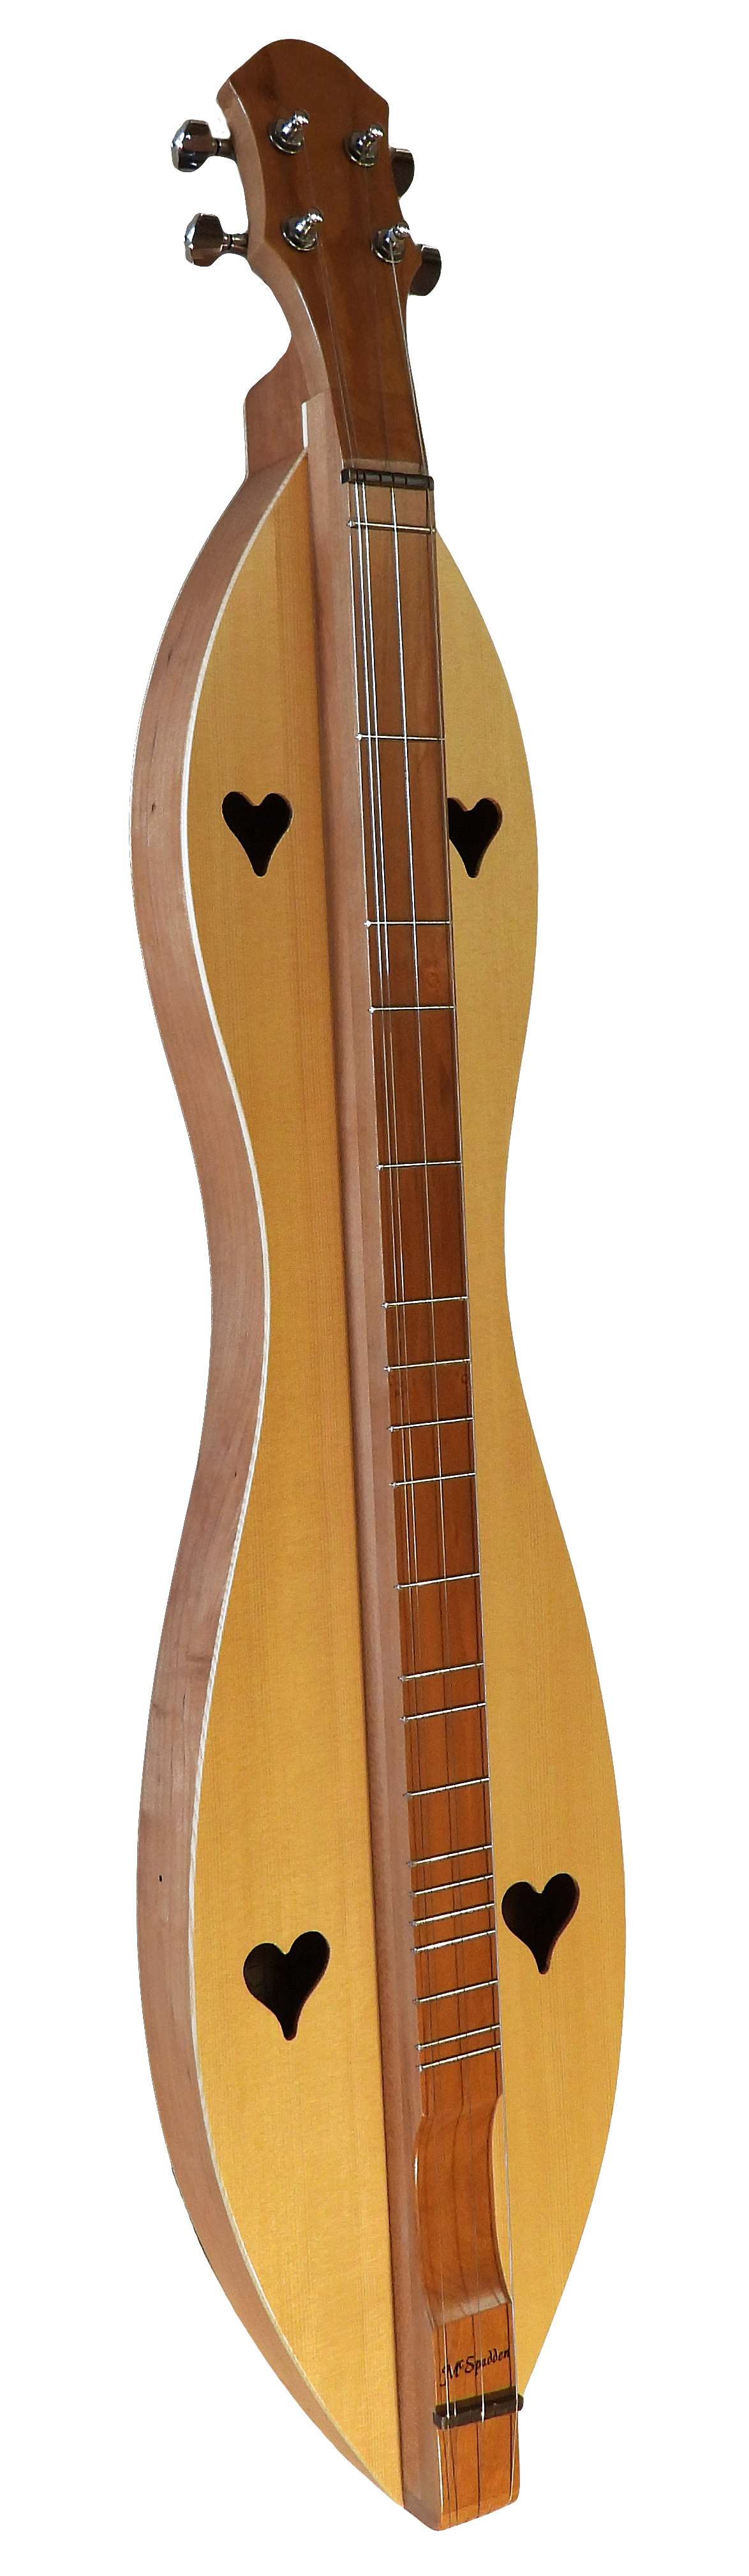 Handcrafted 4 String, Flathead, Hourglass mandolin with Cherry back, sides and Spruce top - Lifetime Warranty included.